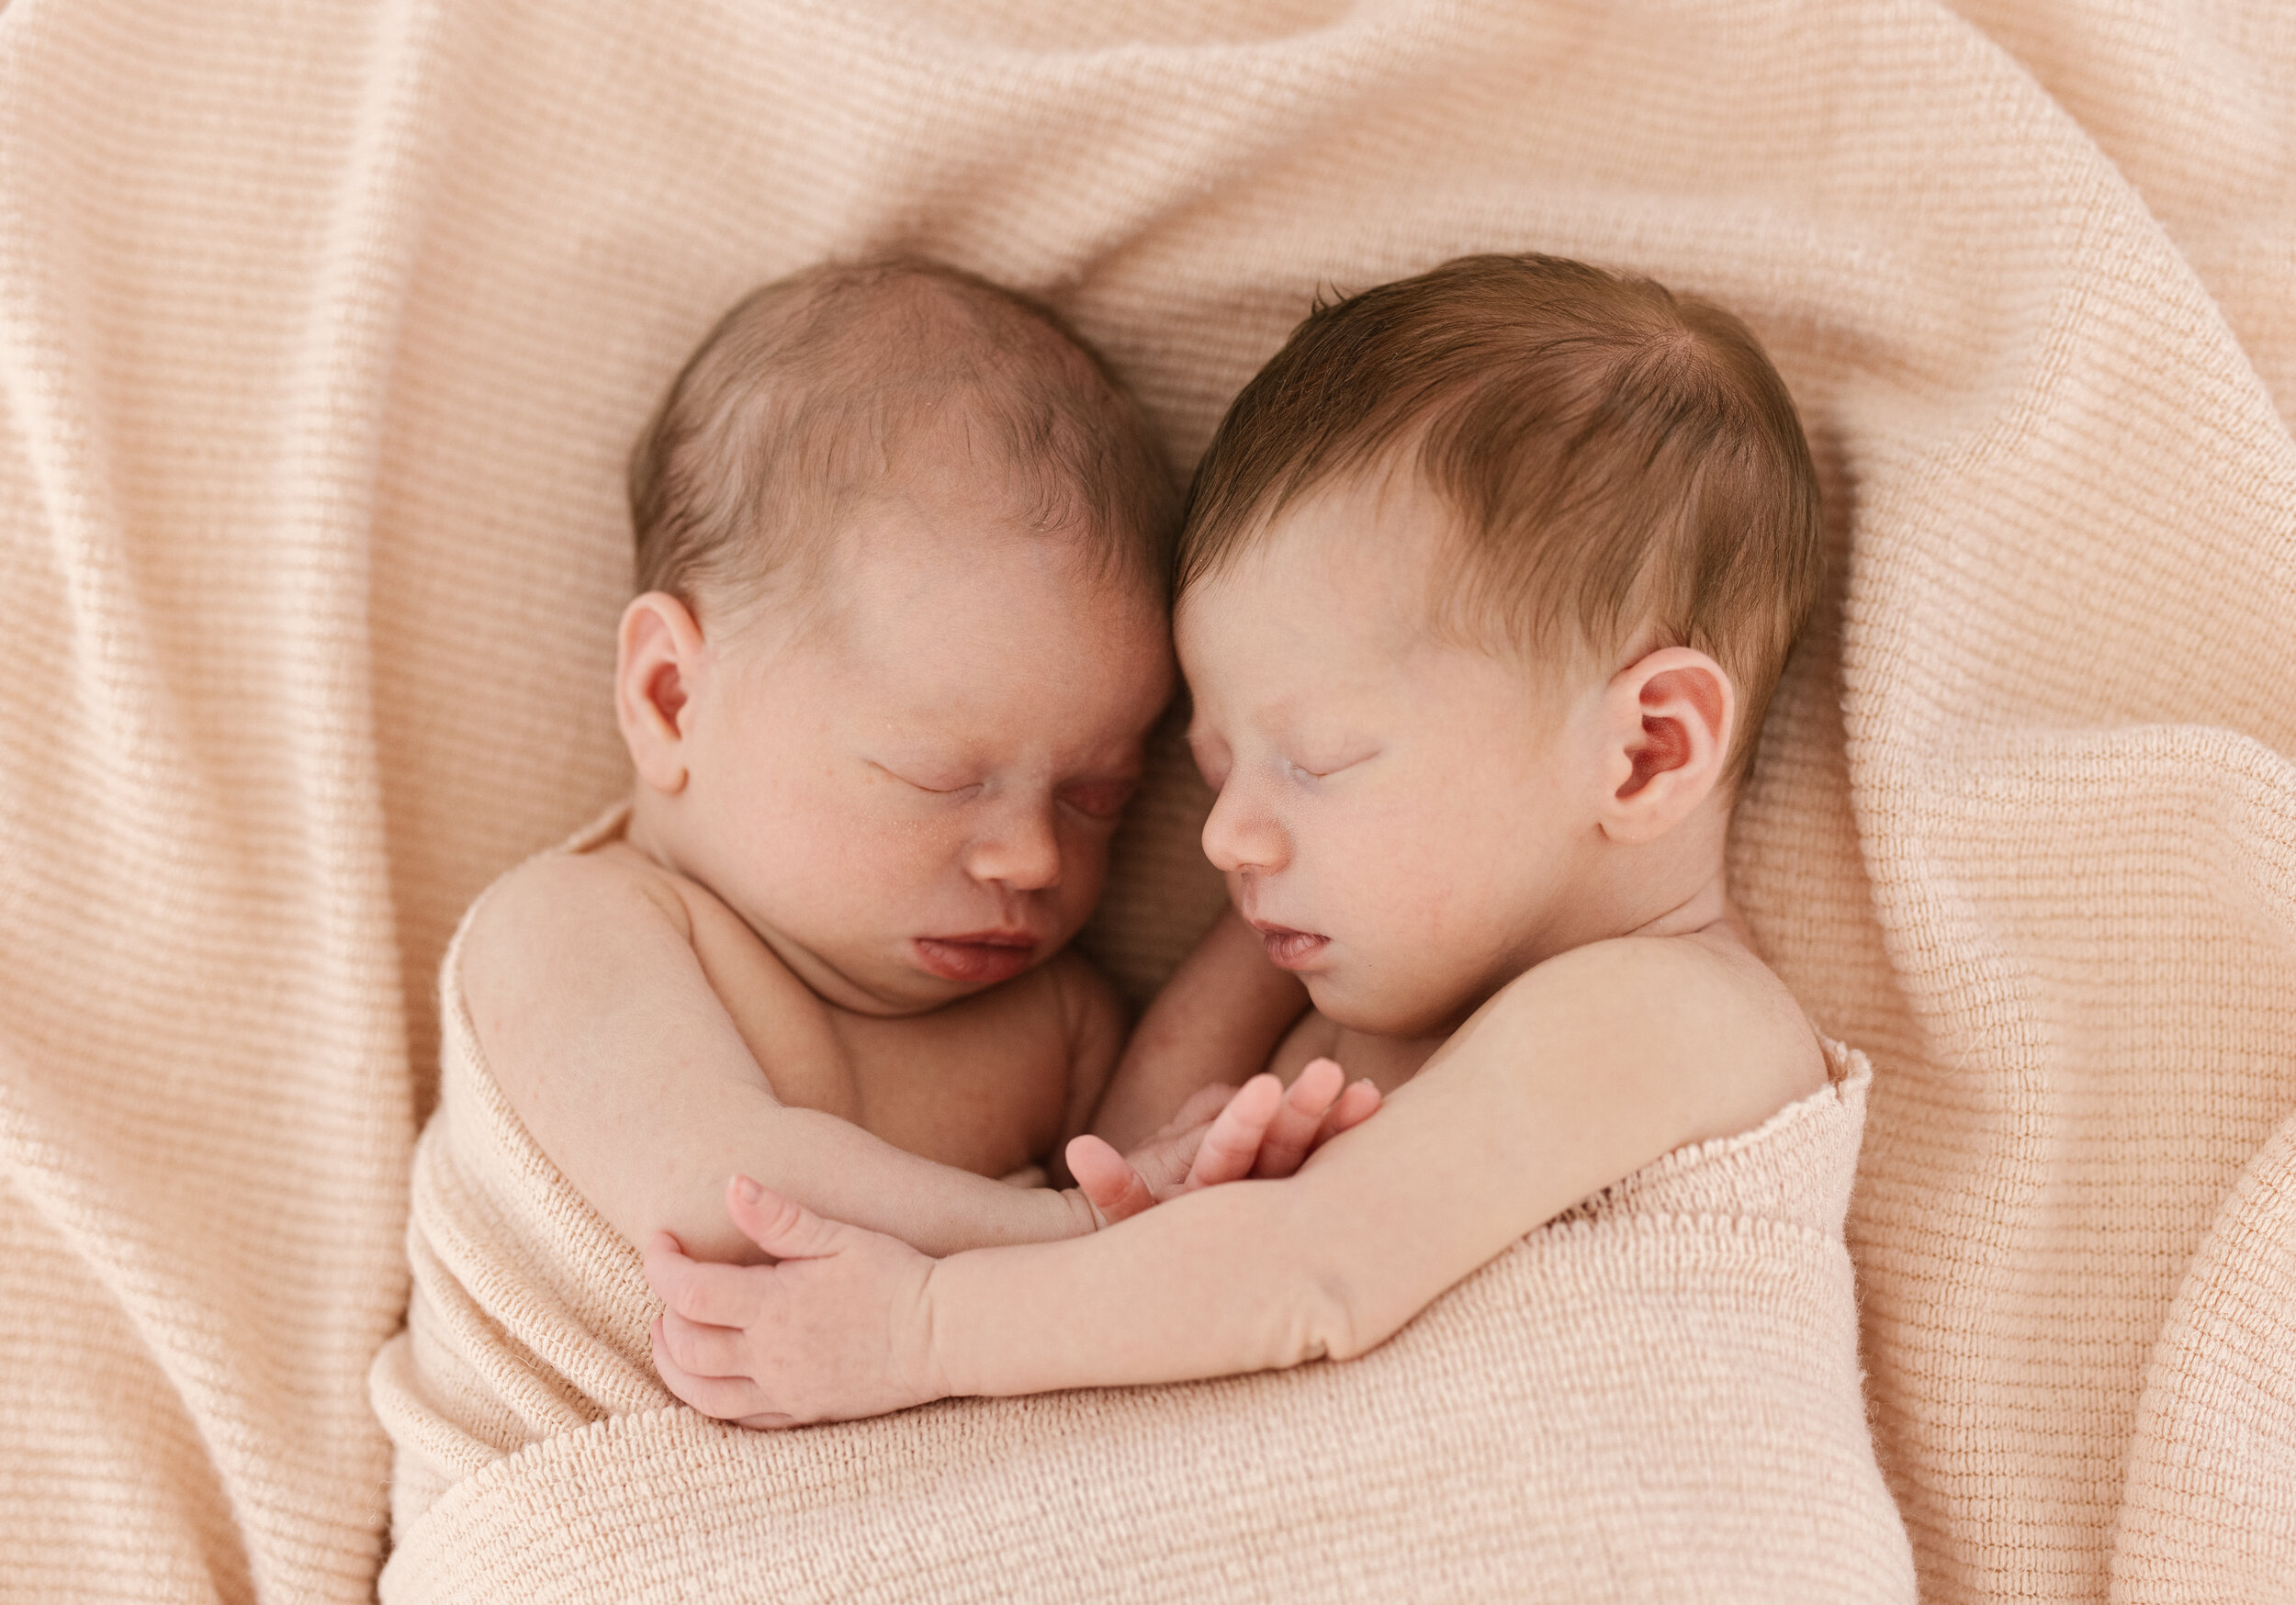 twin newborn babies photographed on a ruffled pink blanket